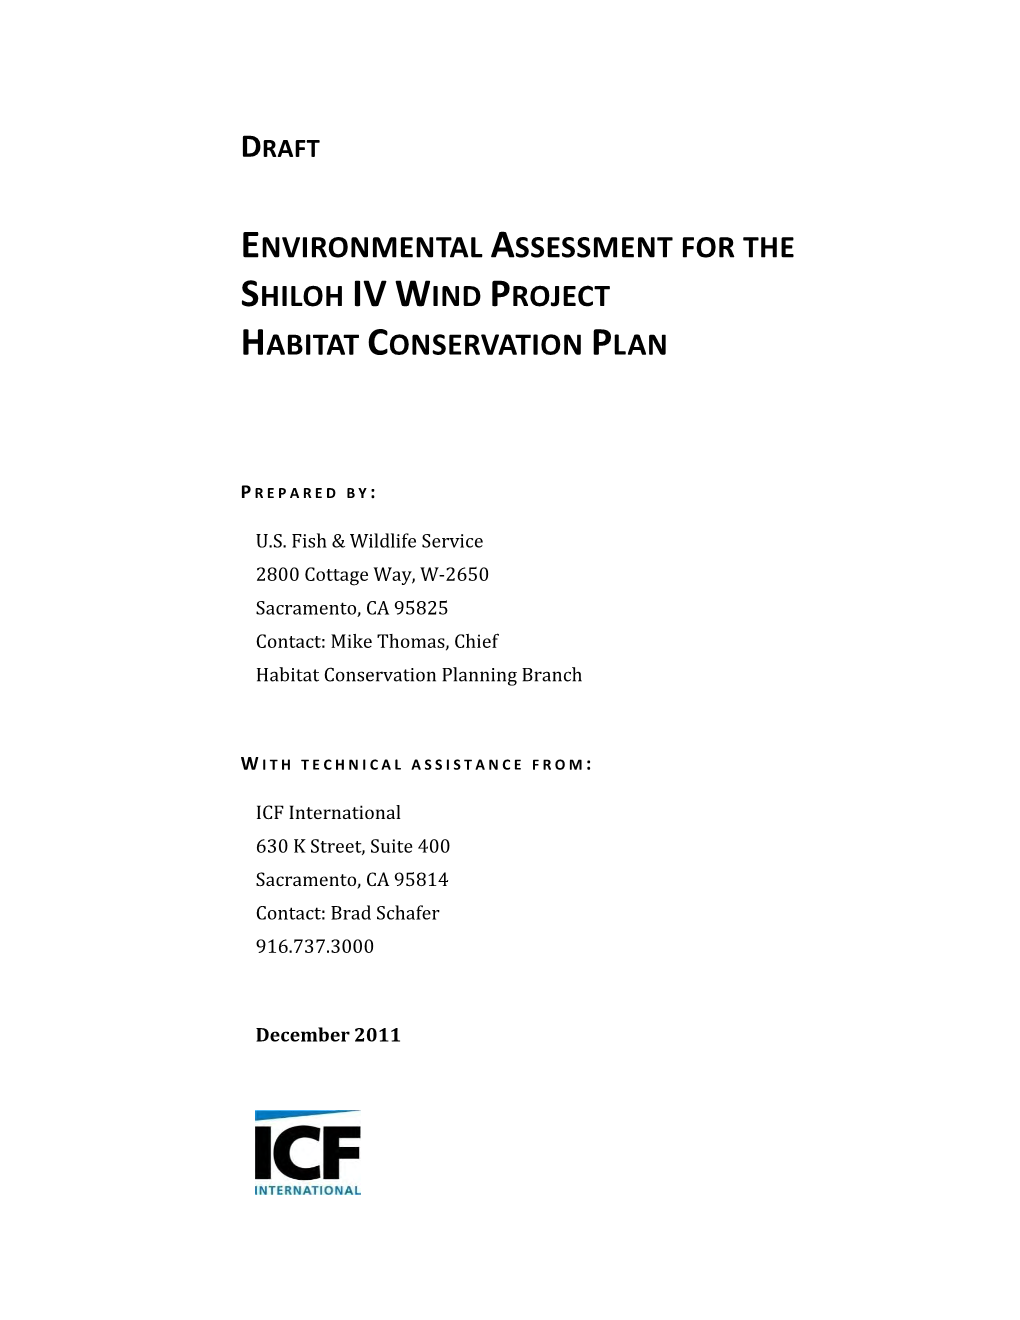 Draft Environmental Assessment for the Shiloh IV Wind Project Habitat Conservation Plan